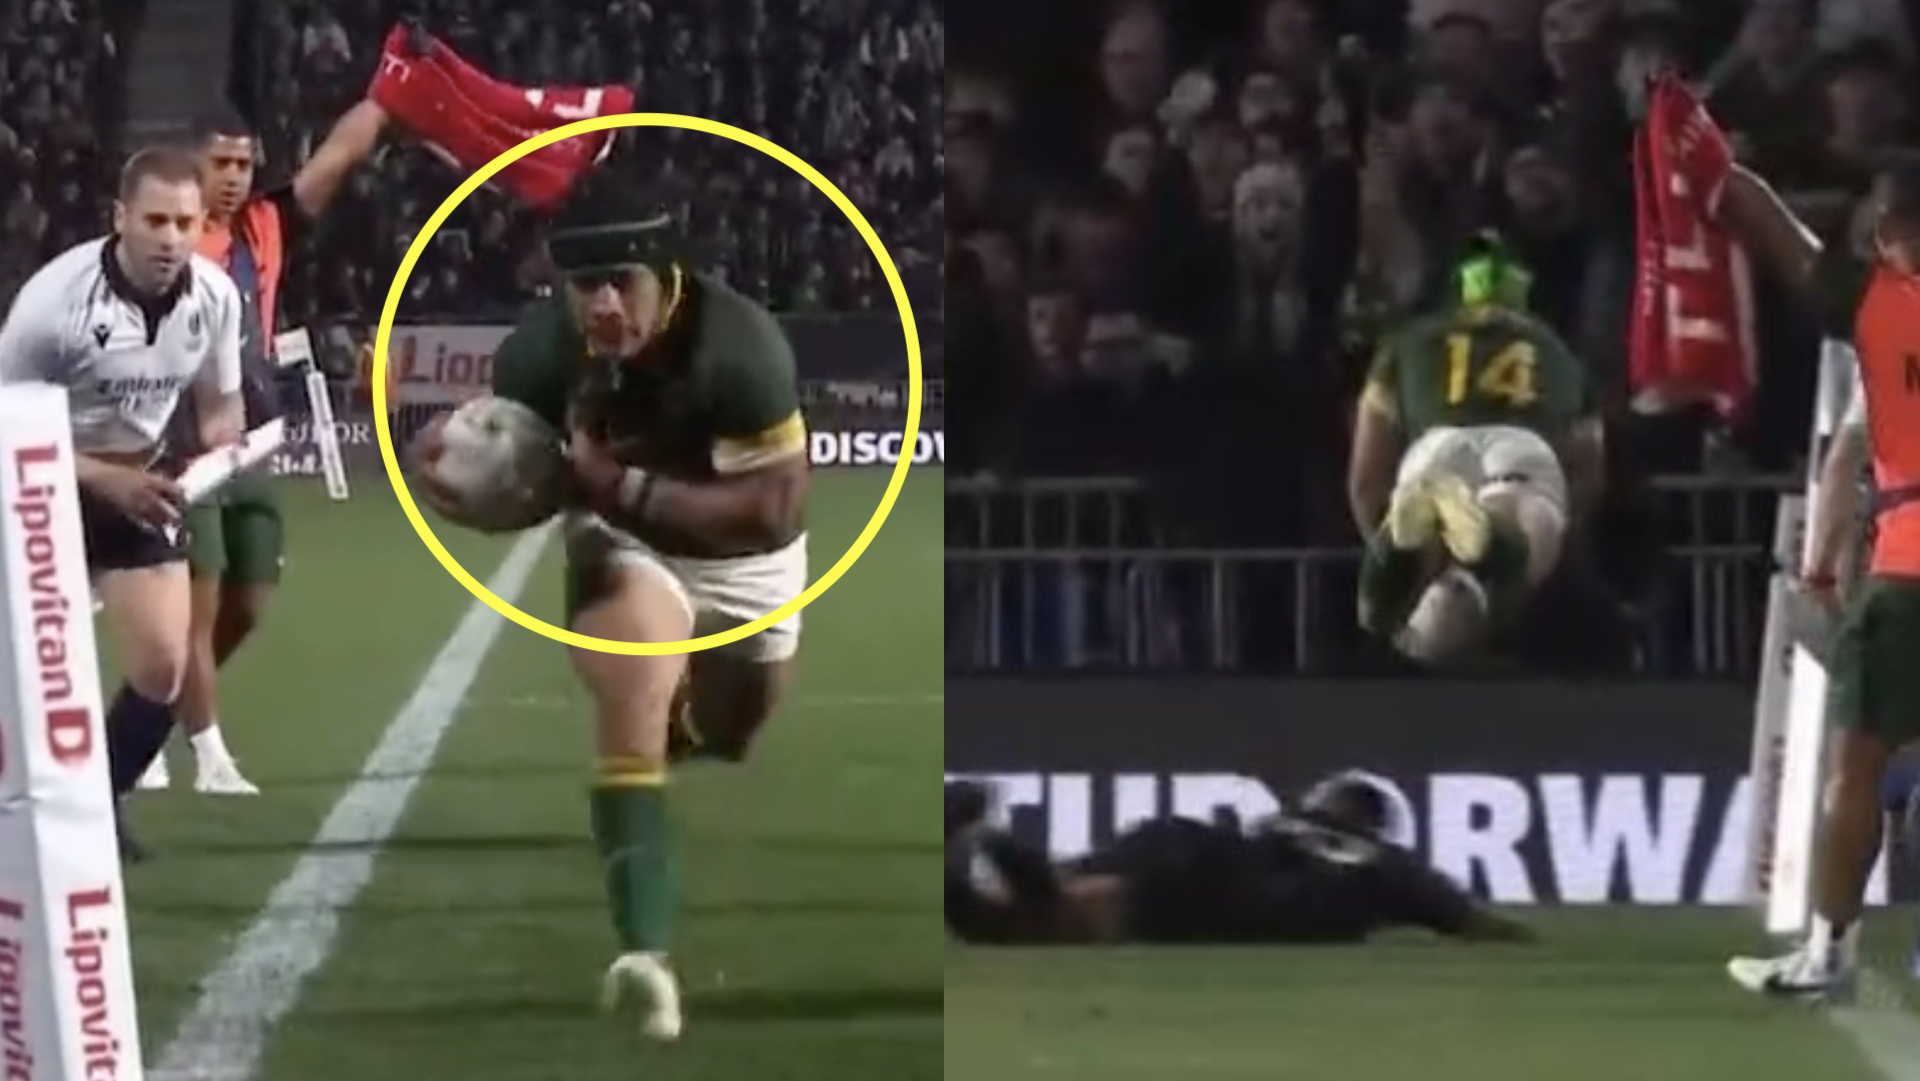 Cheslin Kolbe comes close to humiliating injury after forgetting how to score